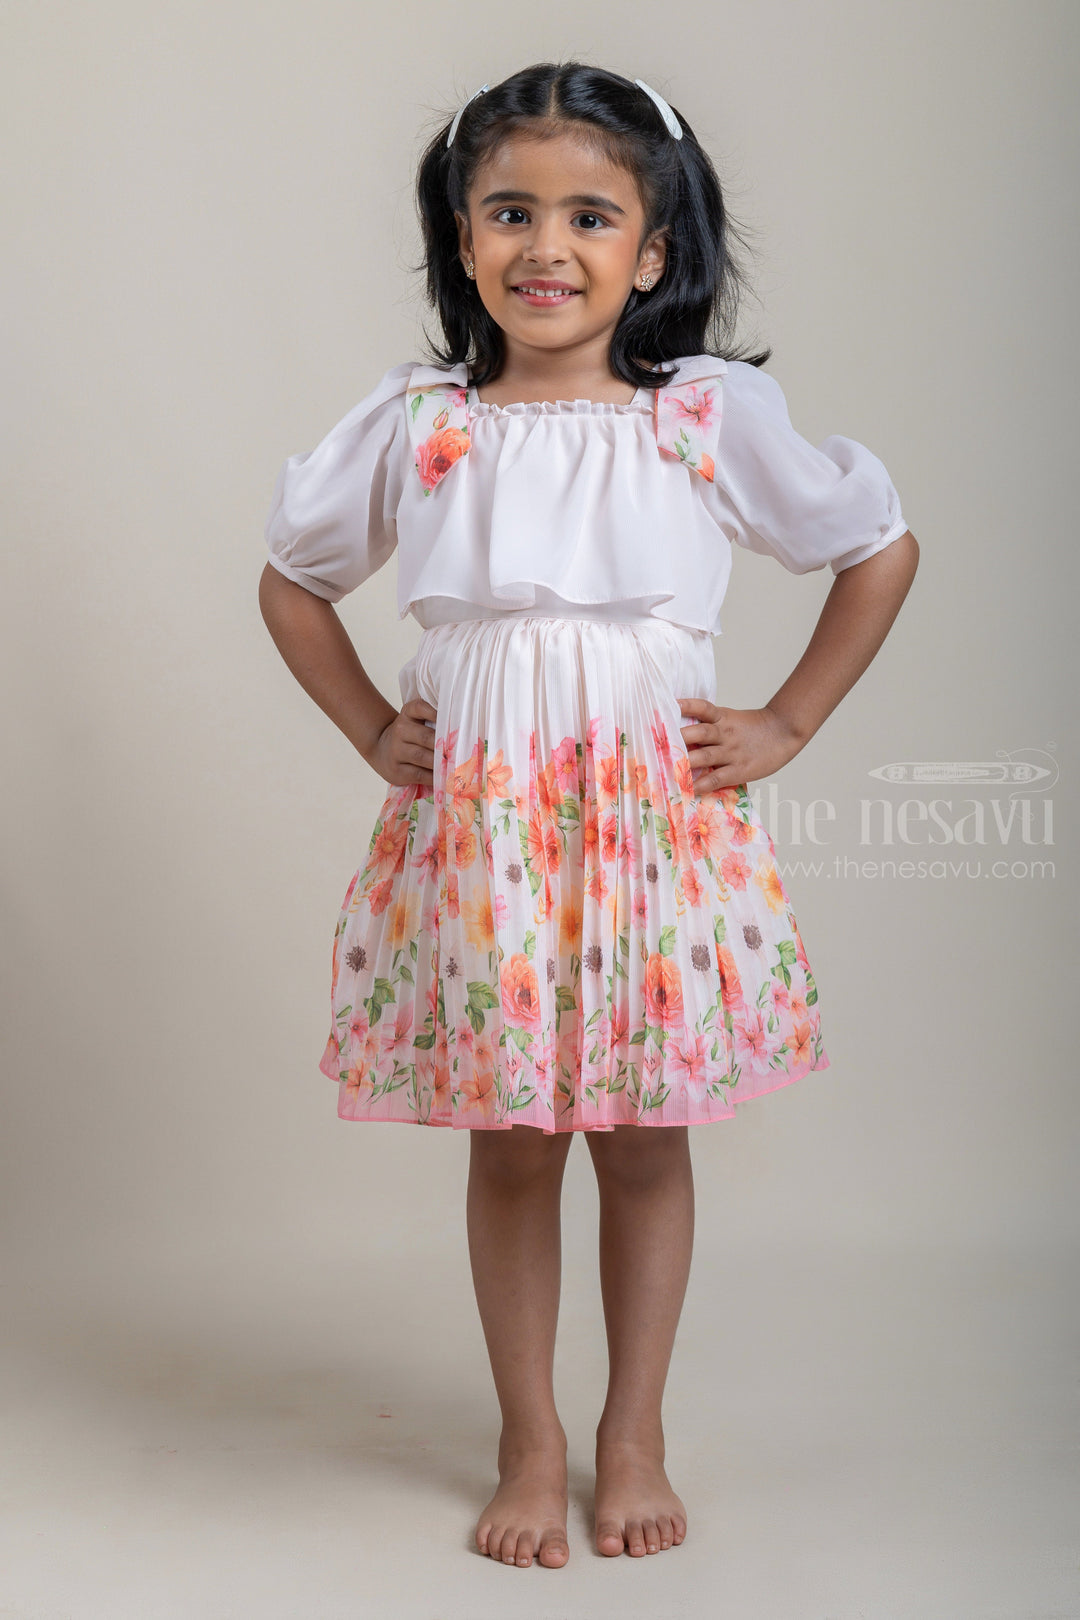 The Nesavu Frocks & Dresses Salmon Colour Pleated Gorgette Frock with Multicolour Floral Digital Print and Puff Sleeve psr silks Nesavu 16 (1Y) / Salmon / Georgette GFC1089A